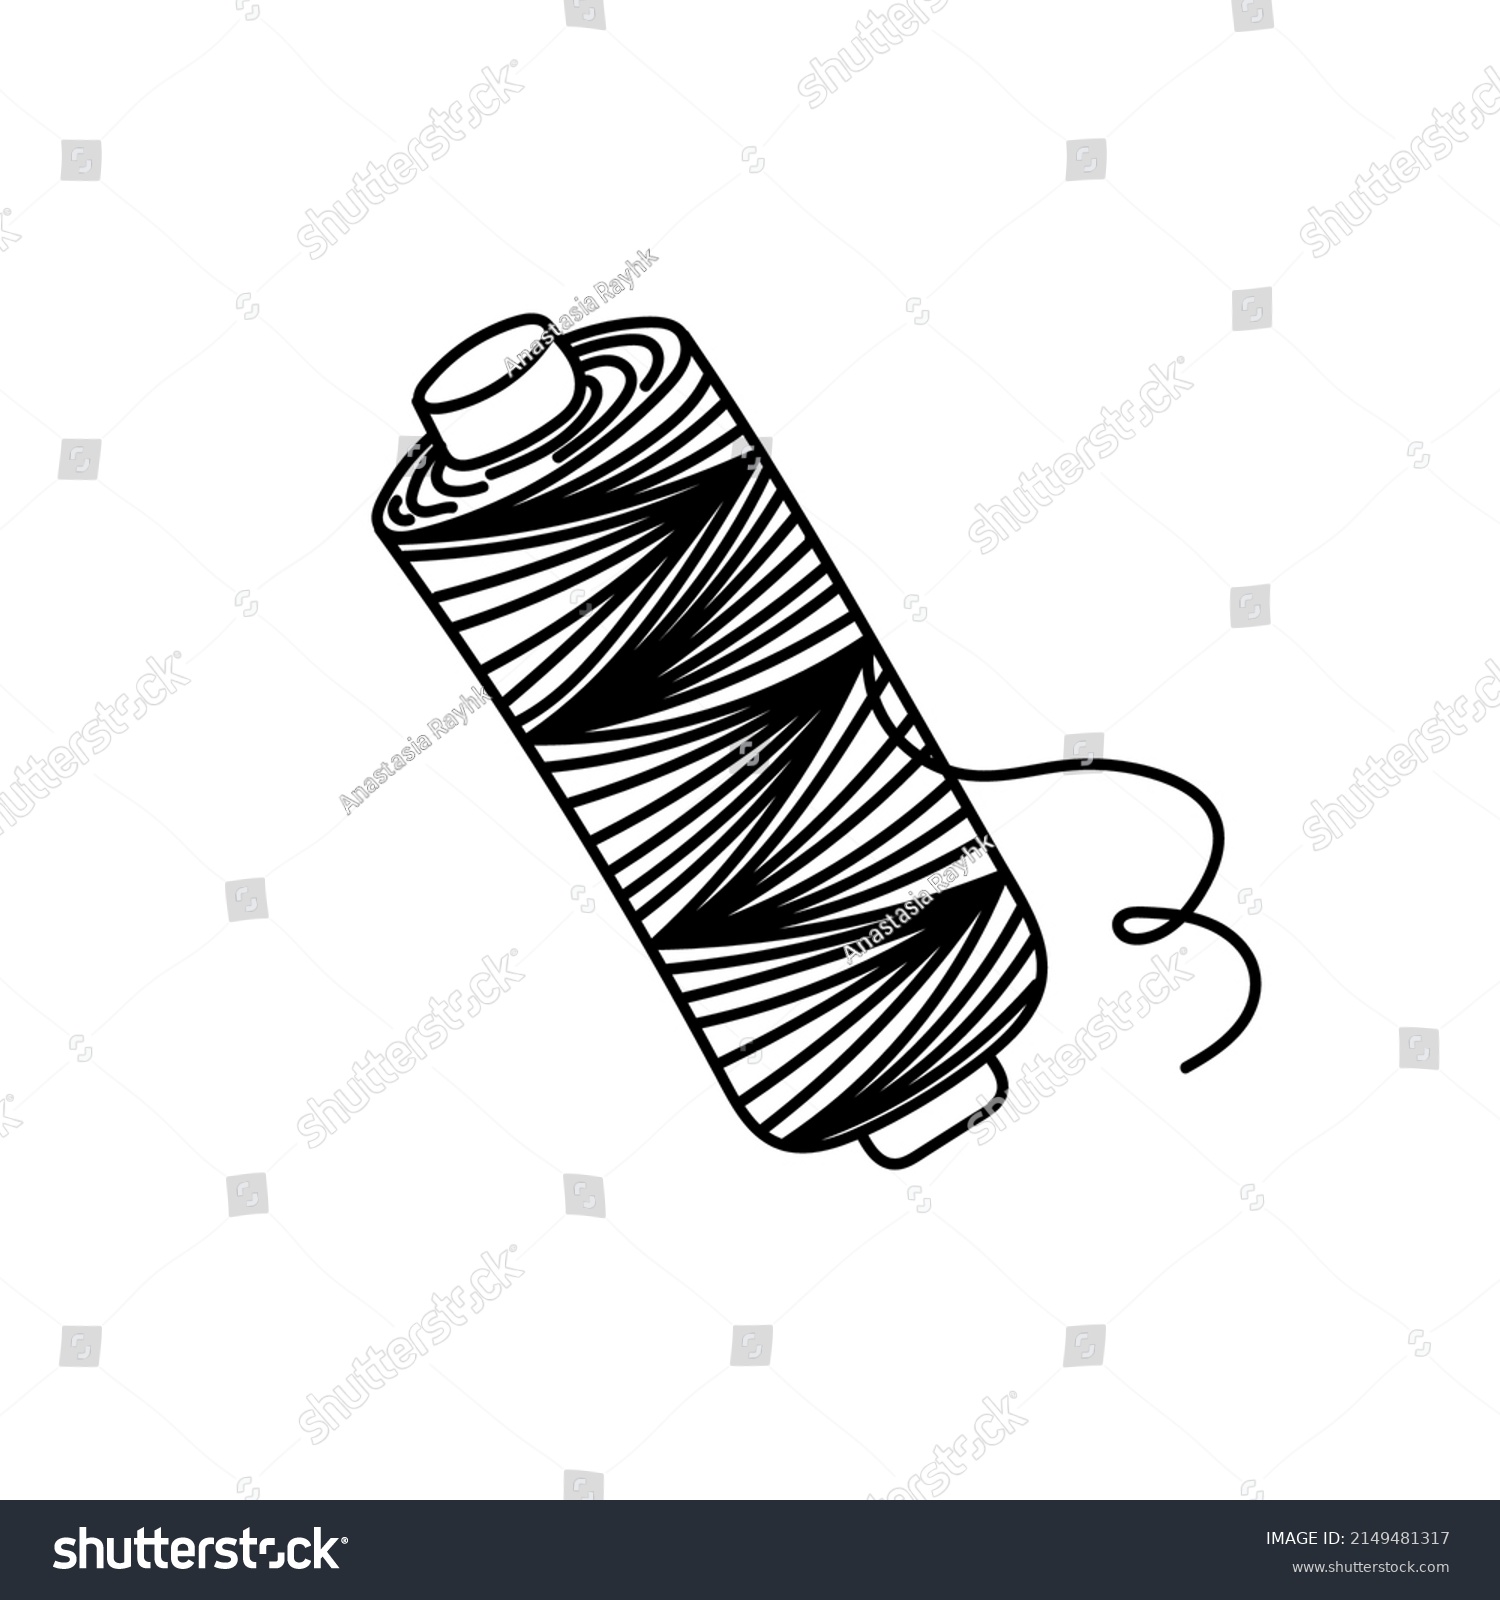 Sewing Thread Handdrawn Sketch Style Doodle Stock Vector (Royalty Free ...